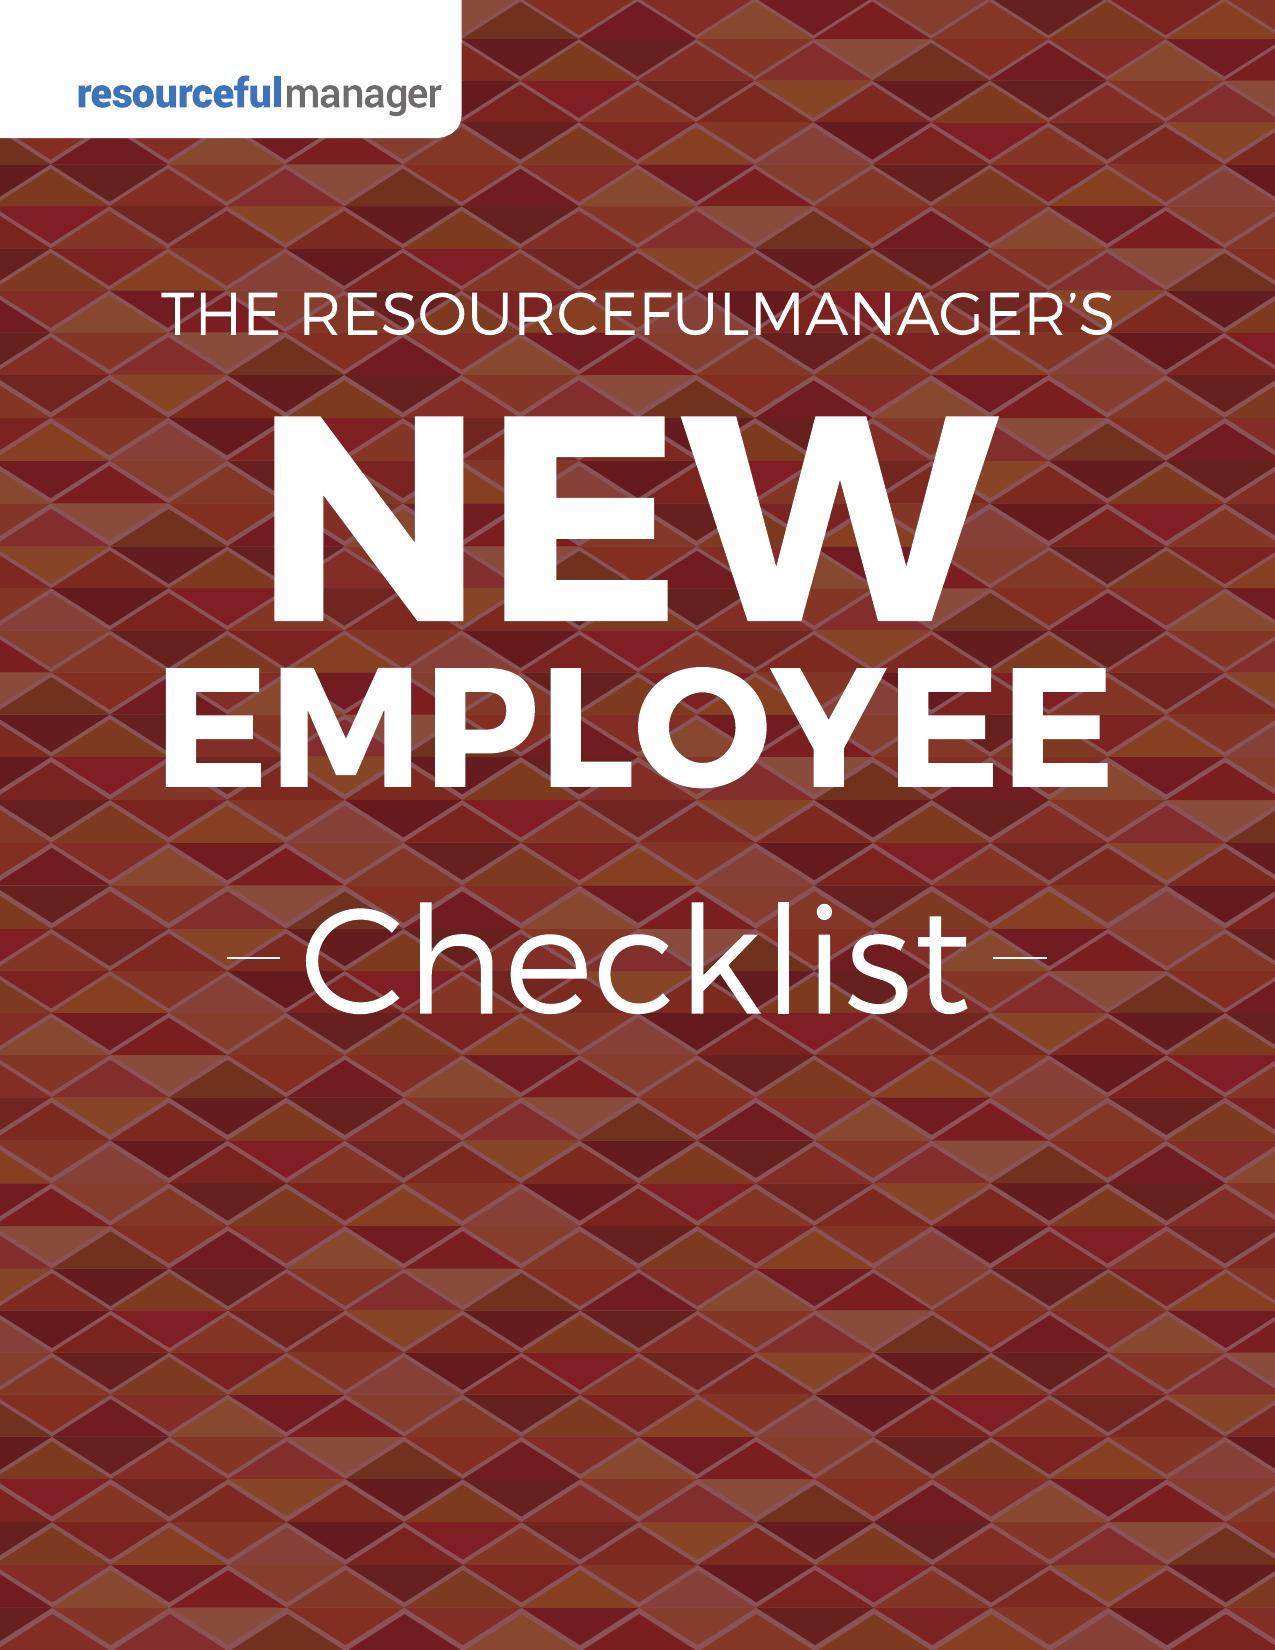 The Resourceful Manager's New Employee Checklist